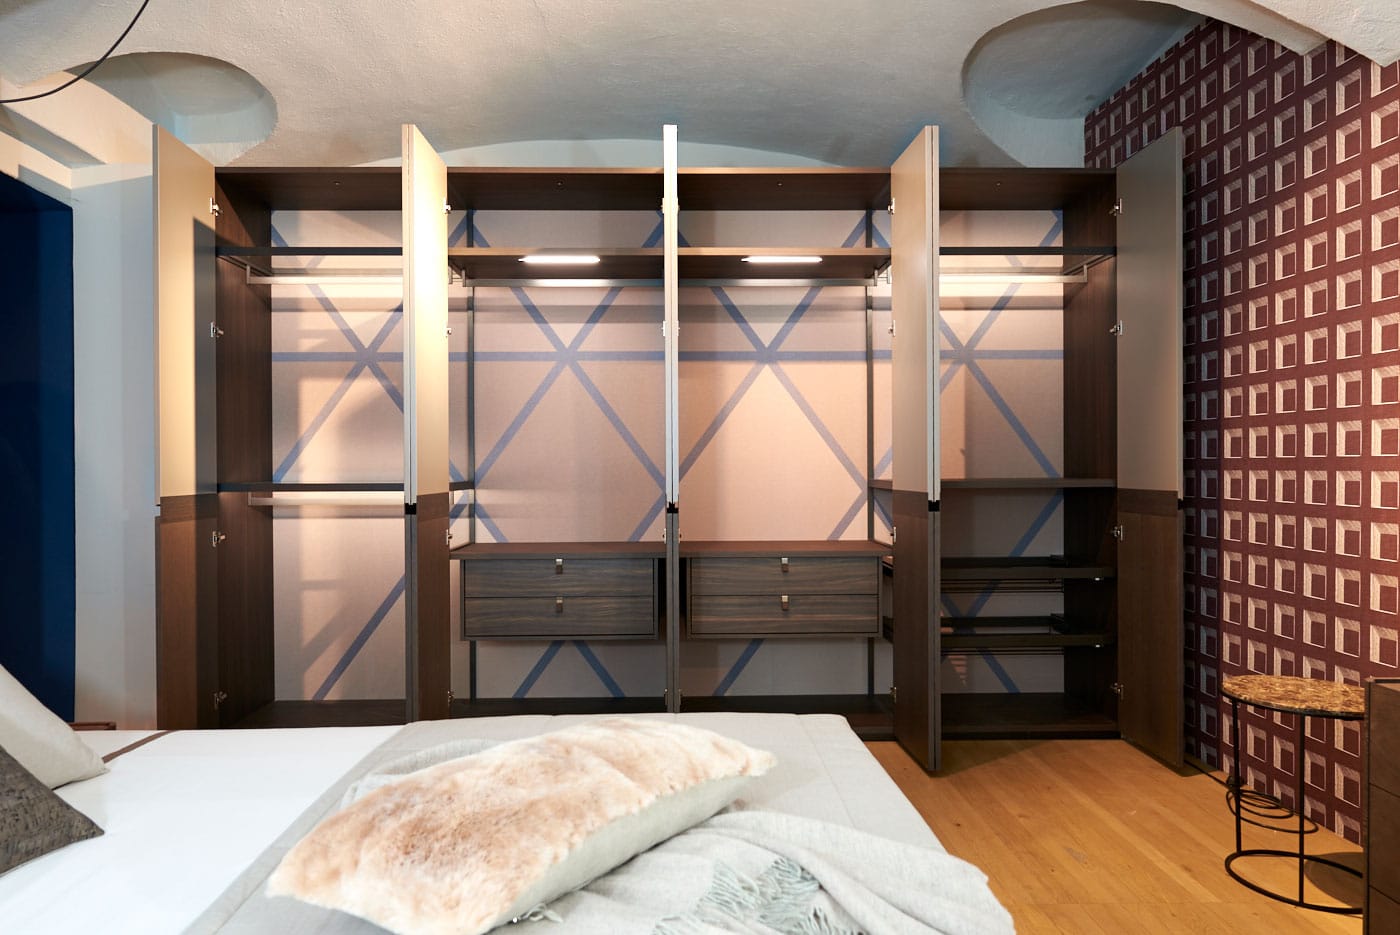 You will love having a large wardrobe in your home